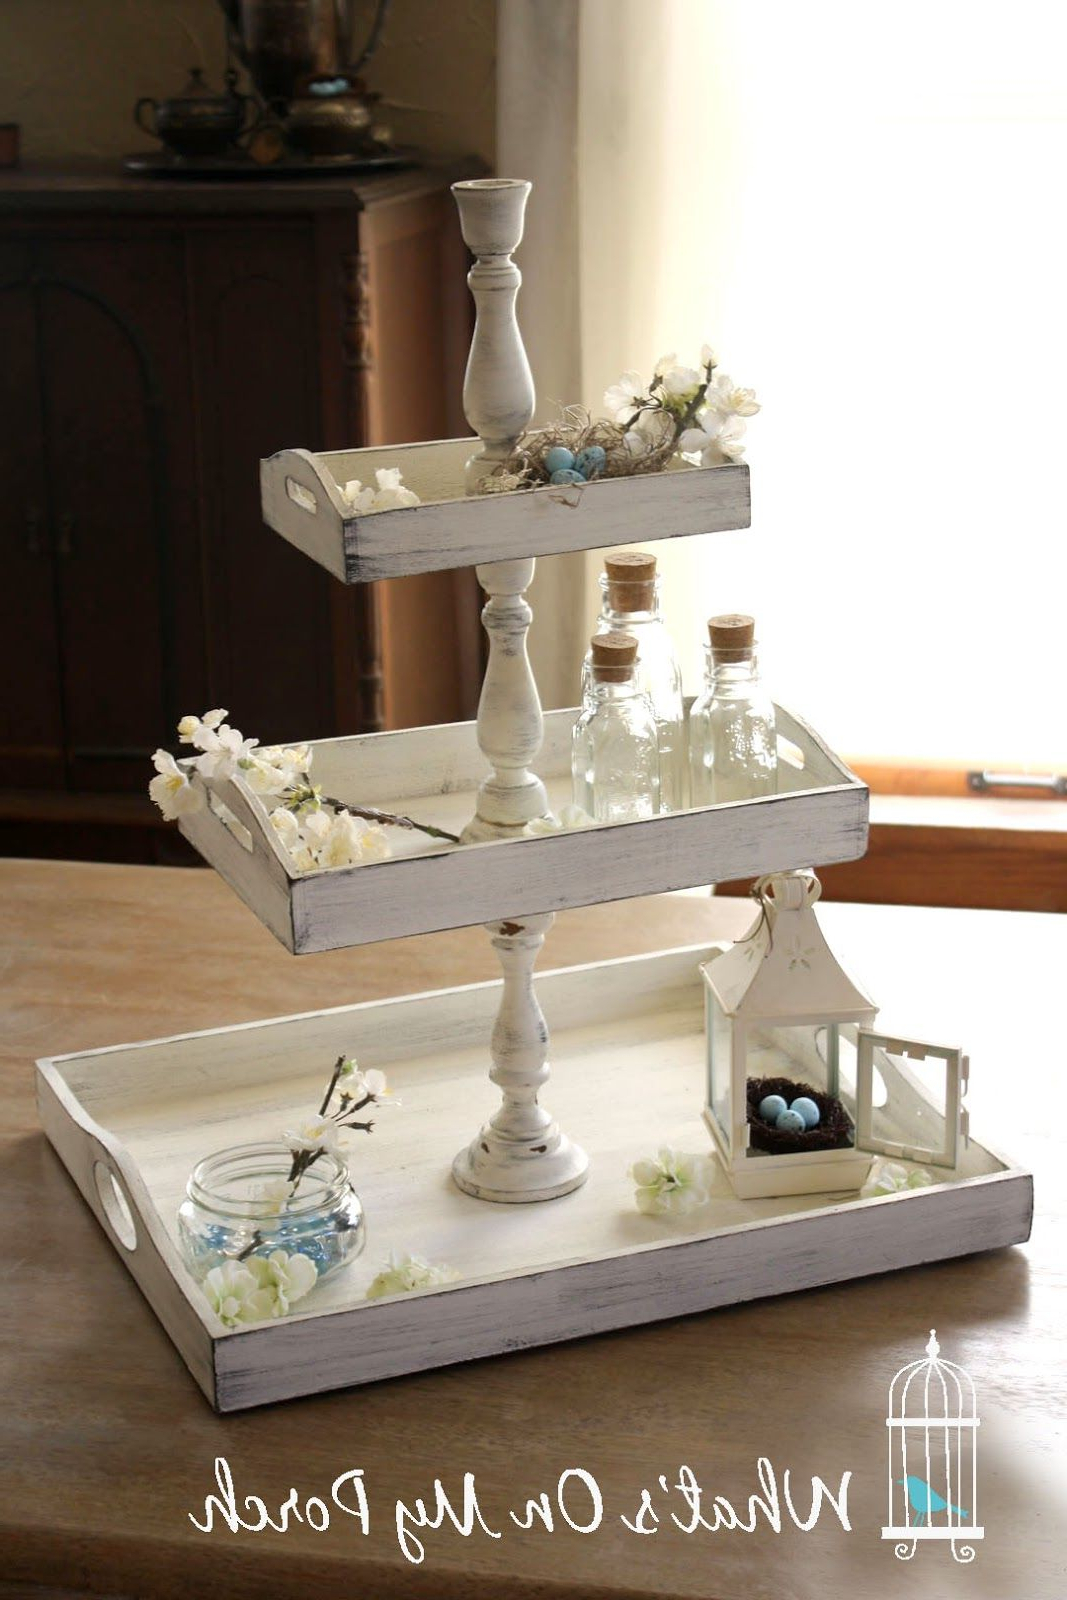 Why Ill Never Make Another 3 Tiered Tray Probably